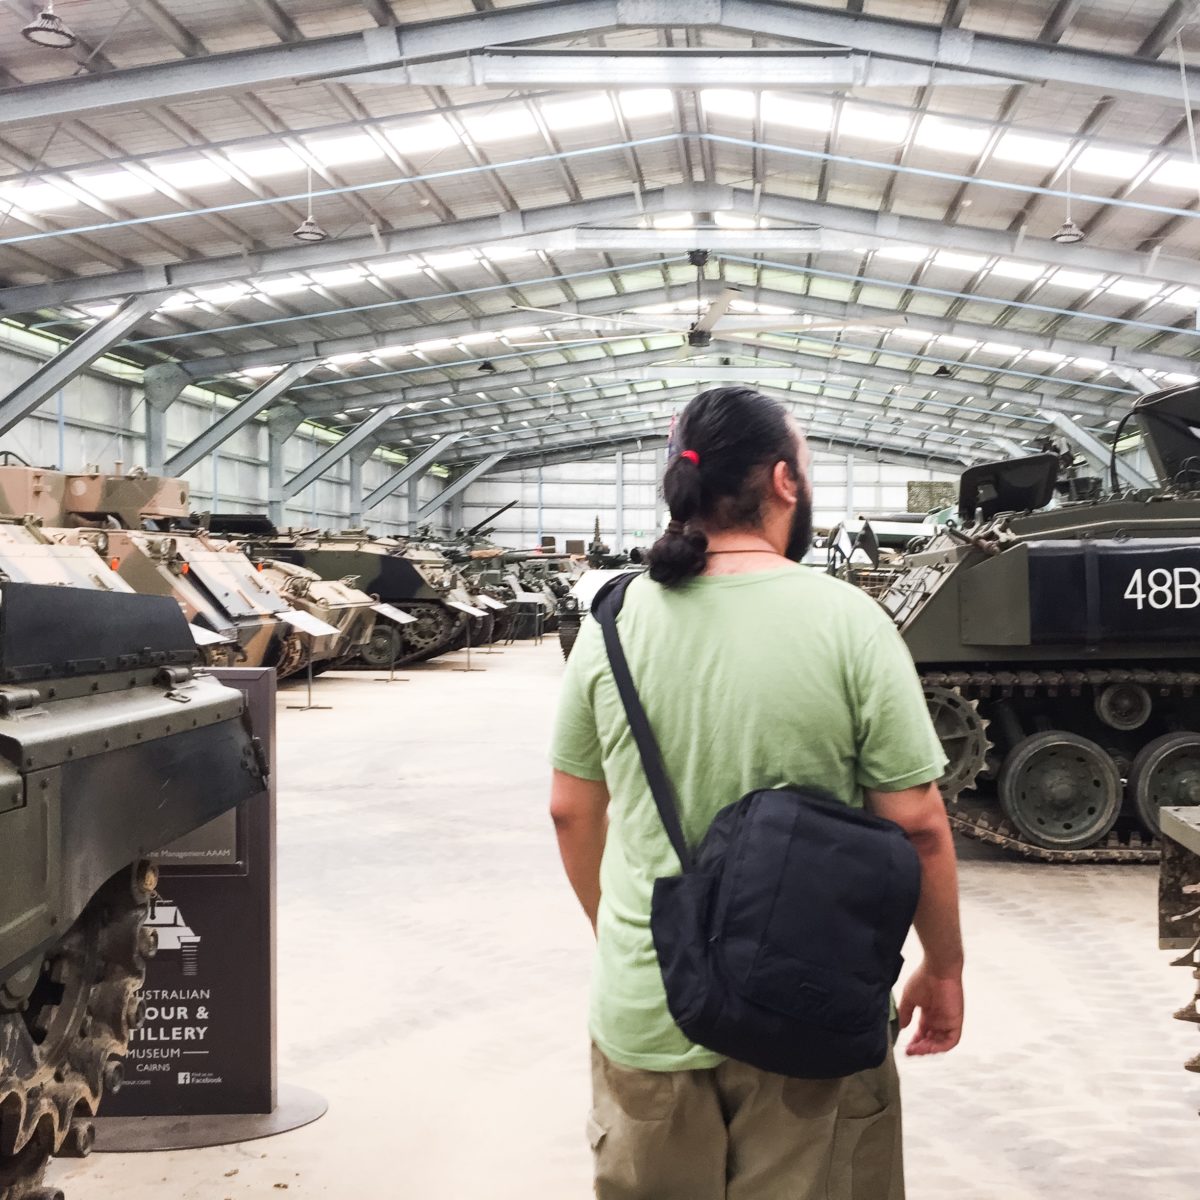 A visit to the Australian Amour and Artillery Museum